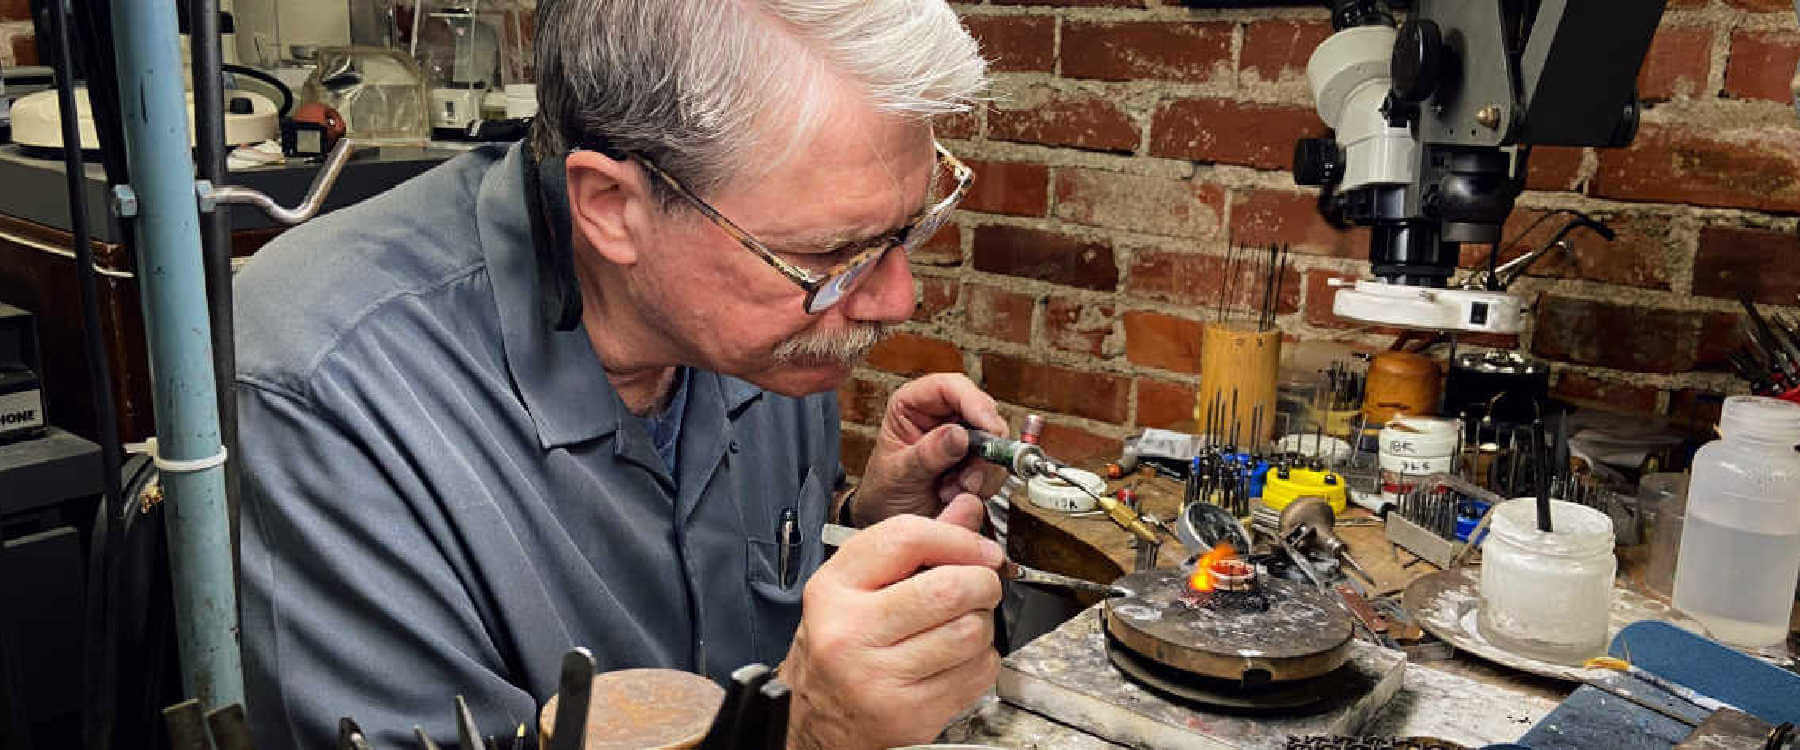 George Fox soldering a ring at his work bench